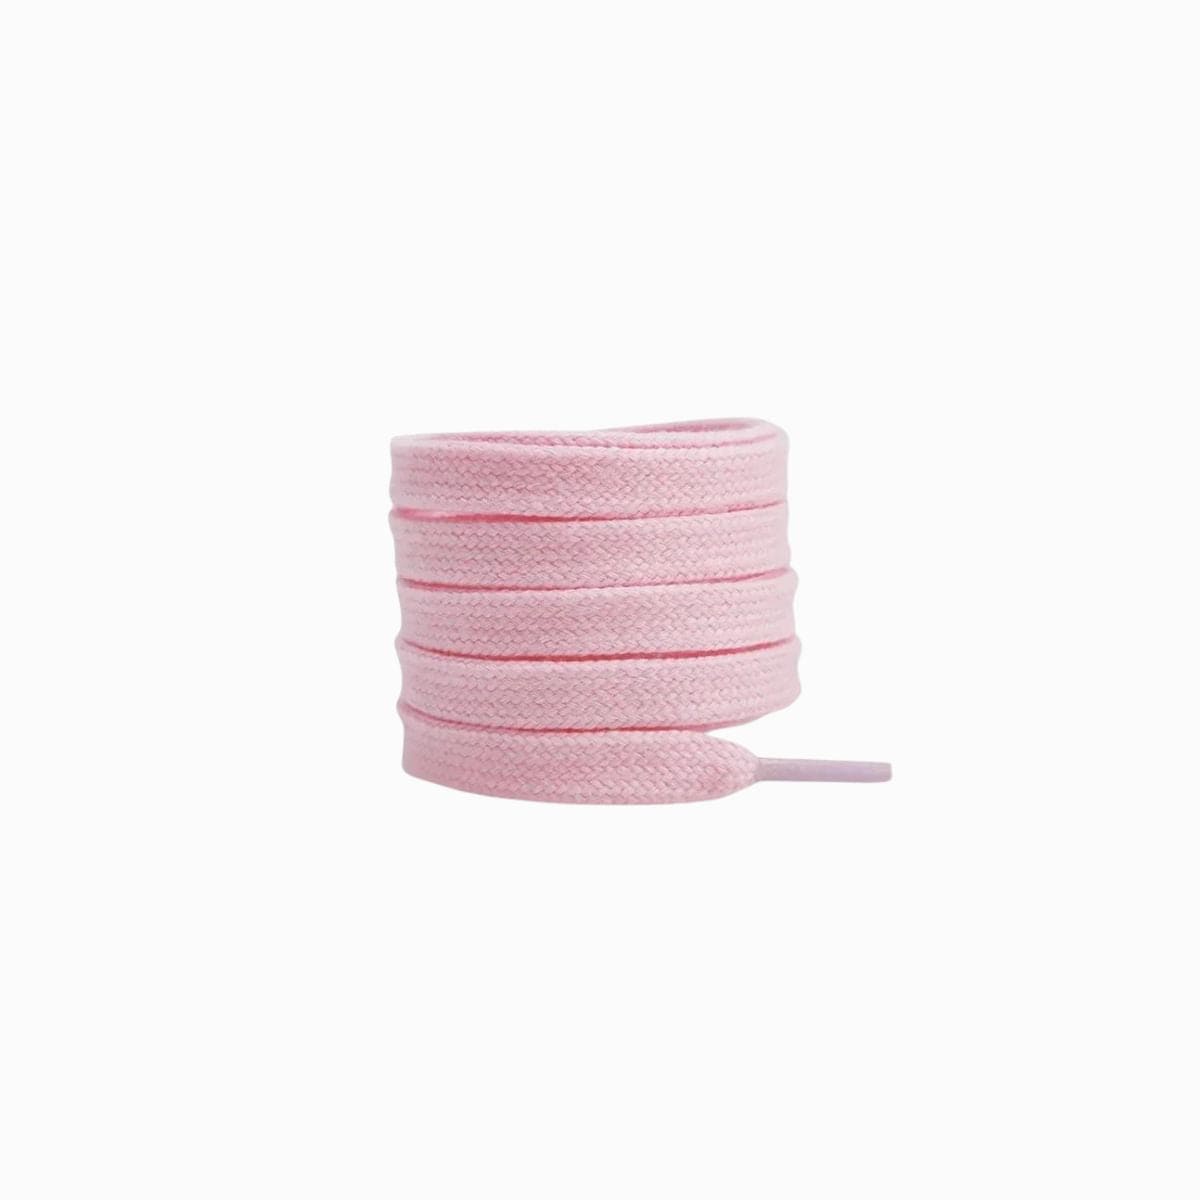 Light Pink Replacement Shoe Laces for Adidas Samba Sneakers by Kicks Shoelaces